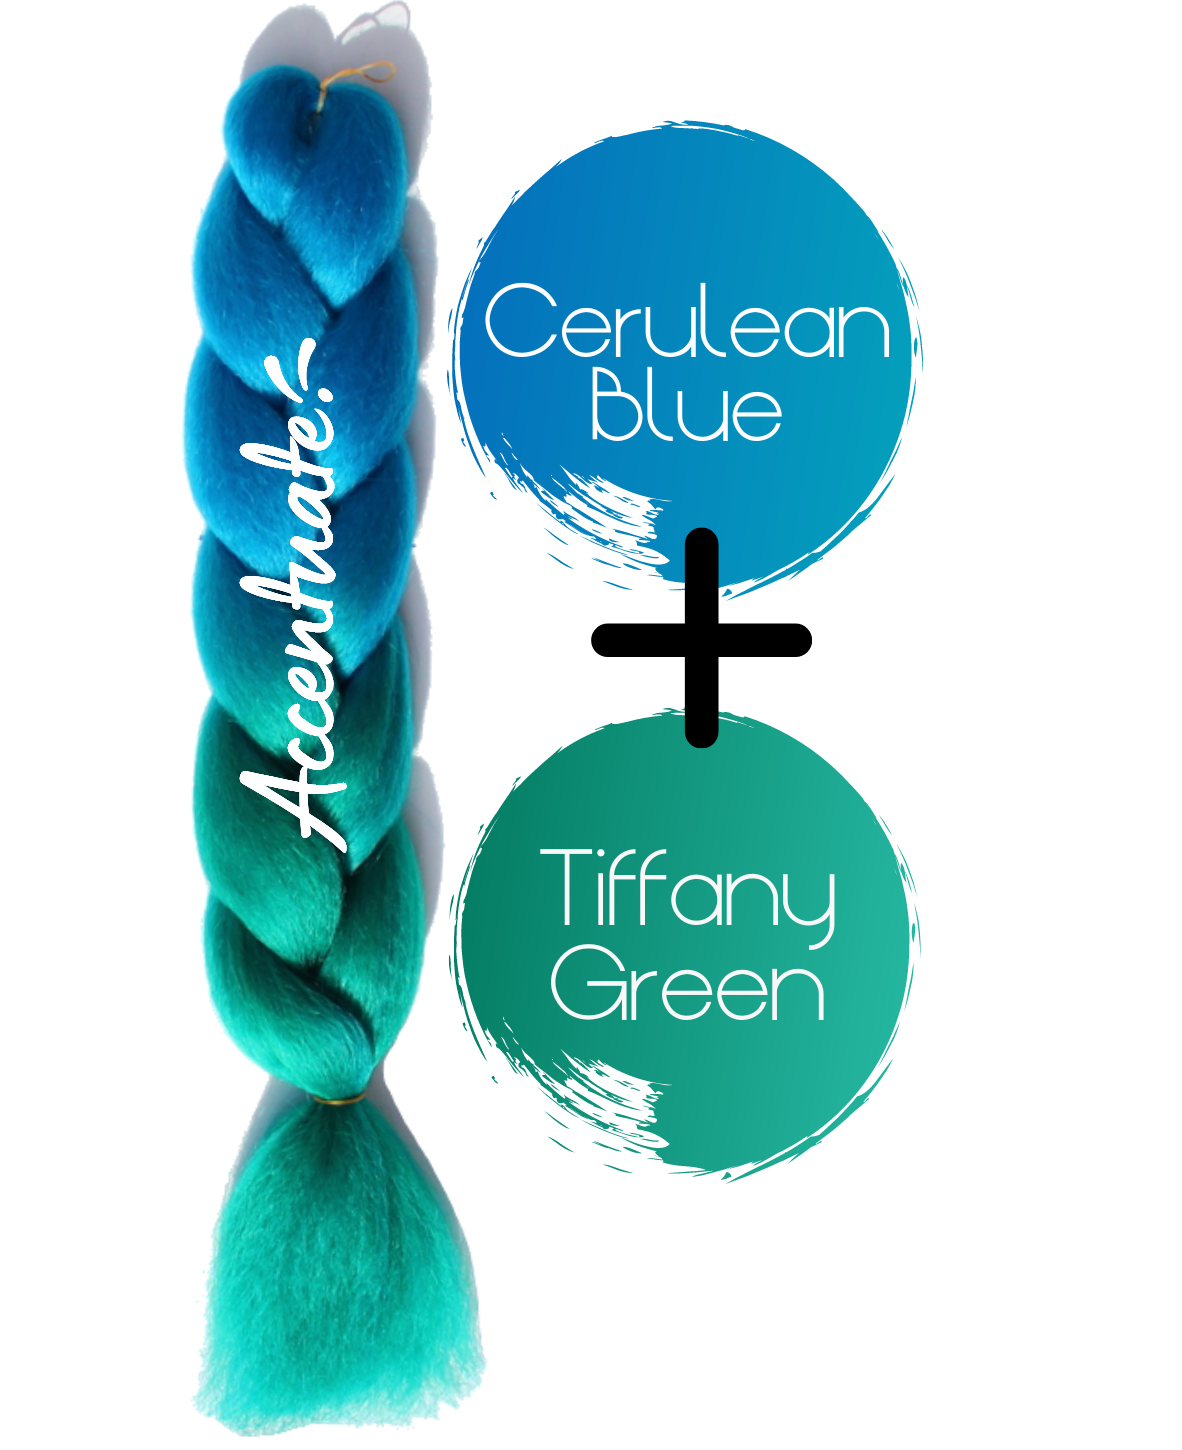 24" Cerulean Blue + Tiffany Green Ombré Jumbo Braid Hair Extension by Accentuate